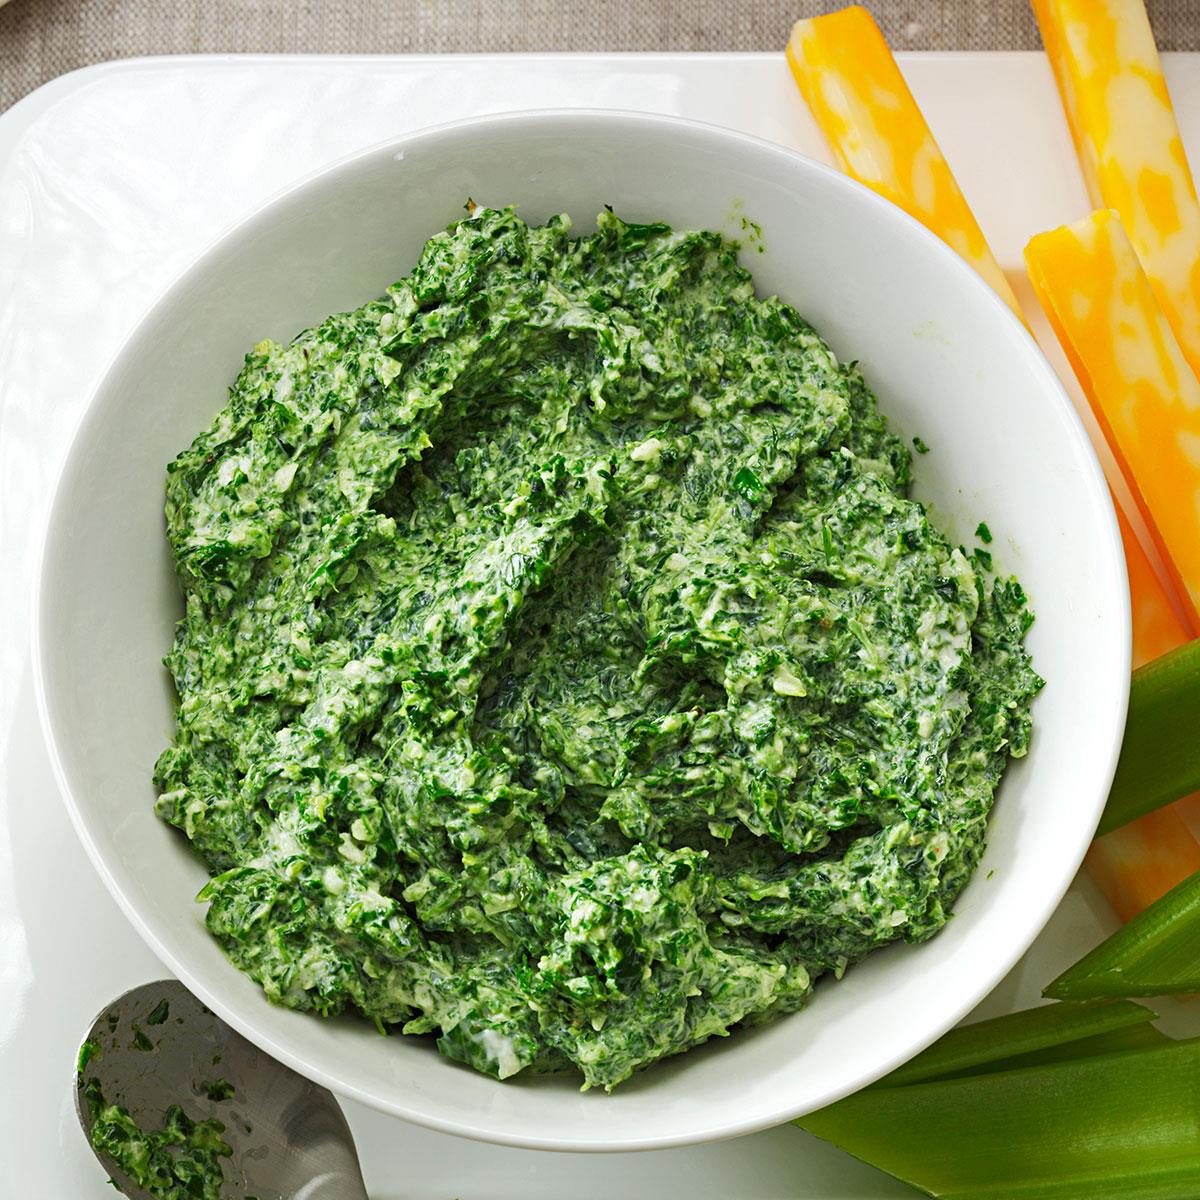 Party Spinach Spread Recipe | Taste of Home